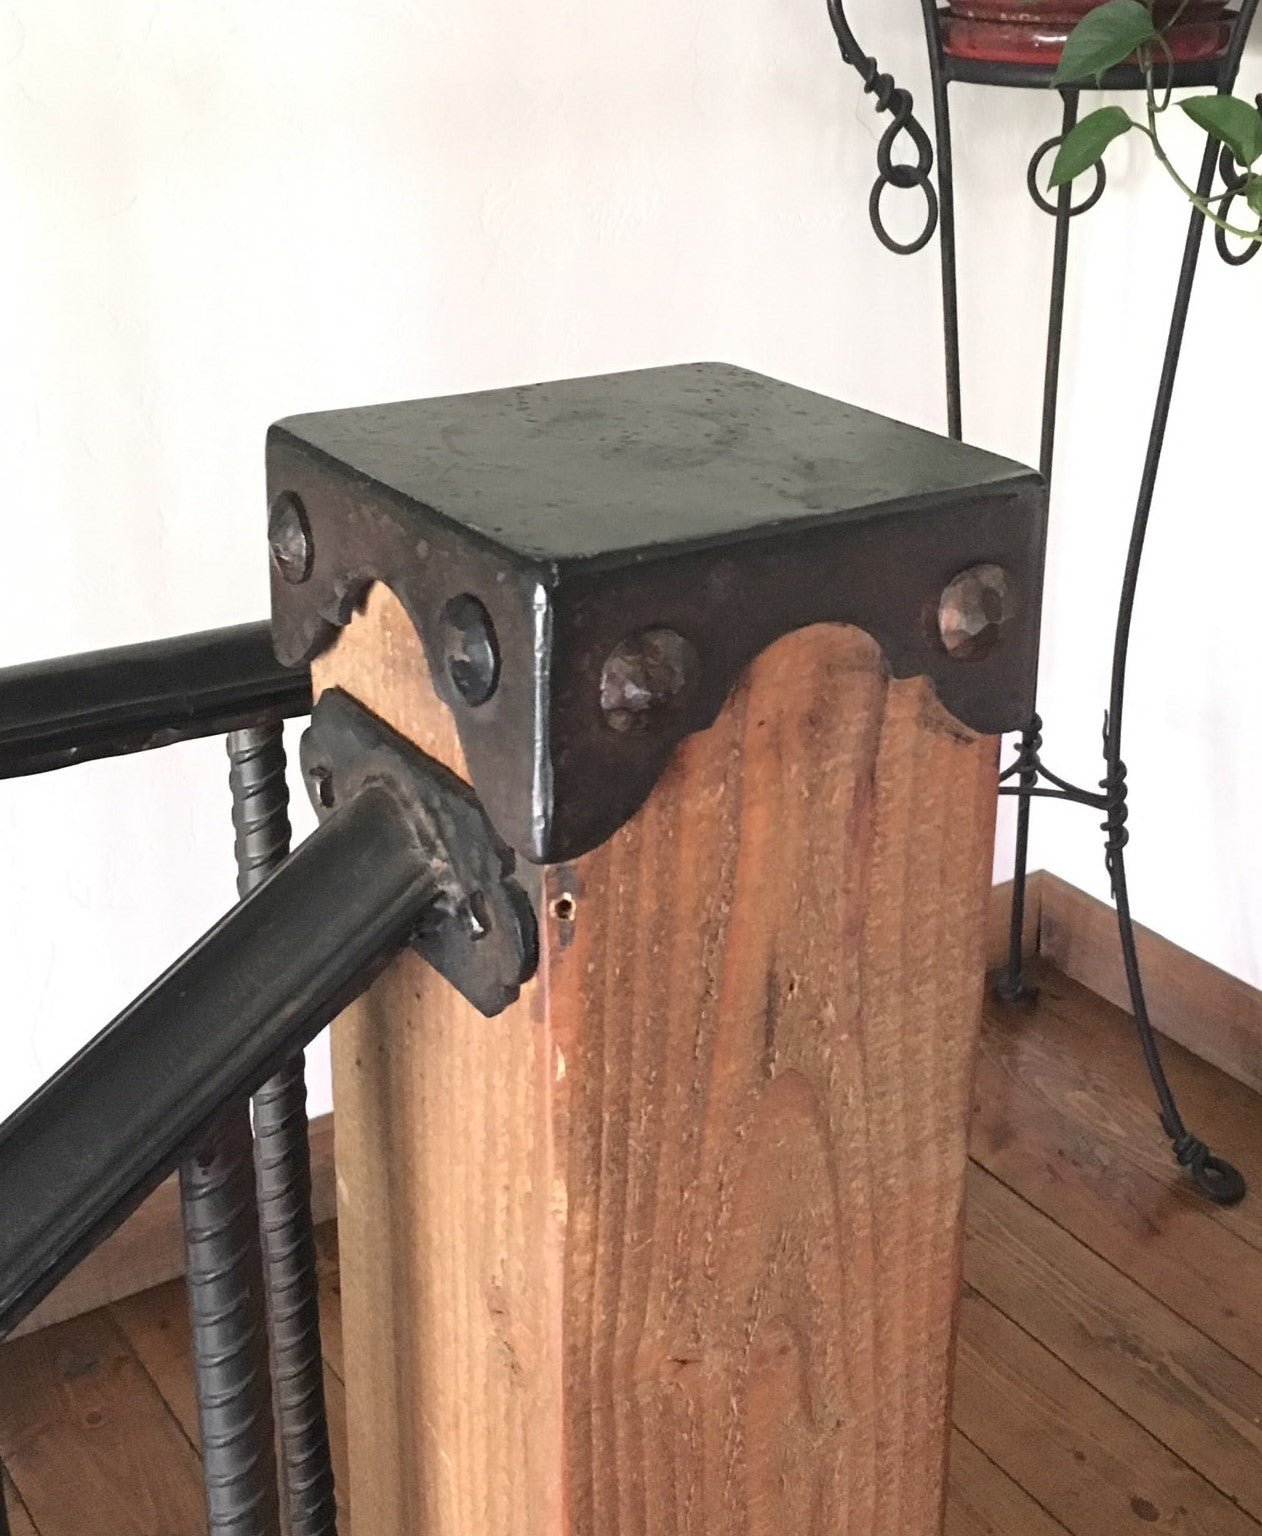 What Is the Use of a Decorative Joist Hanger? – Old West Iron